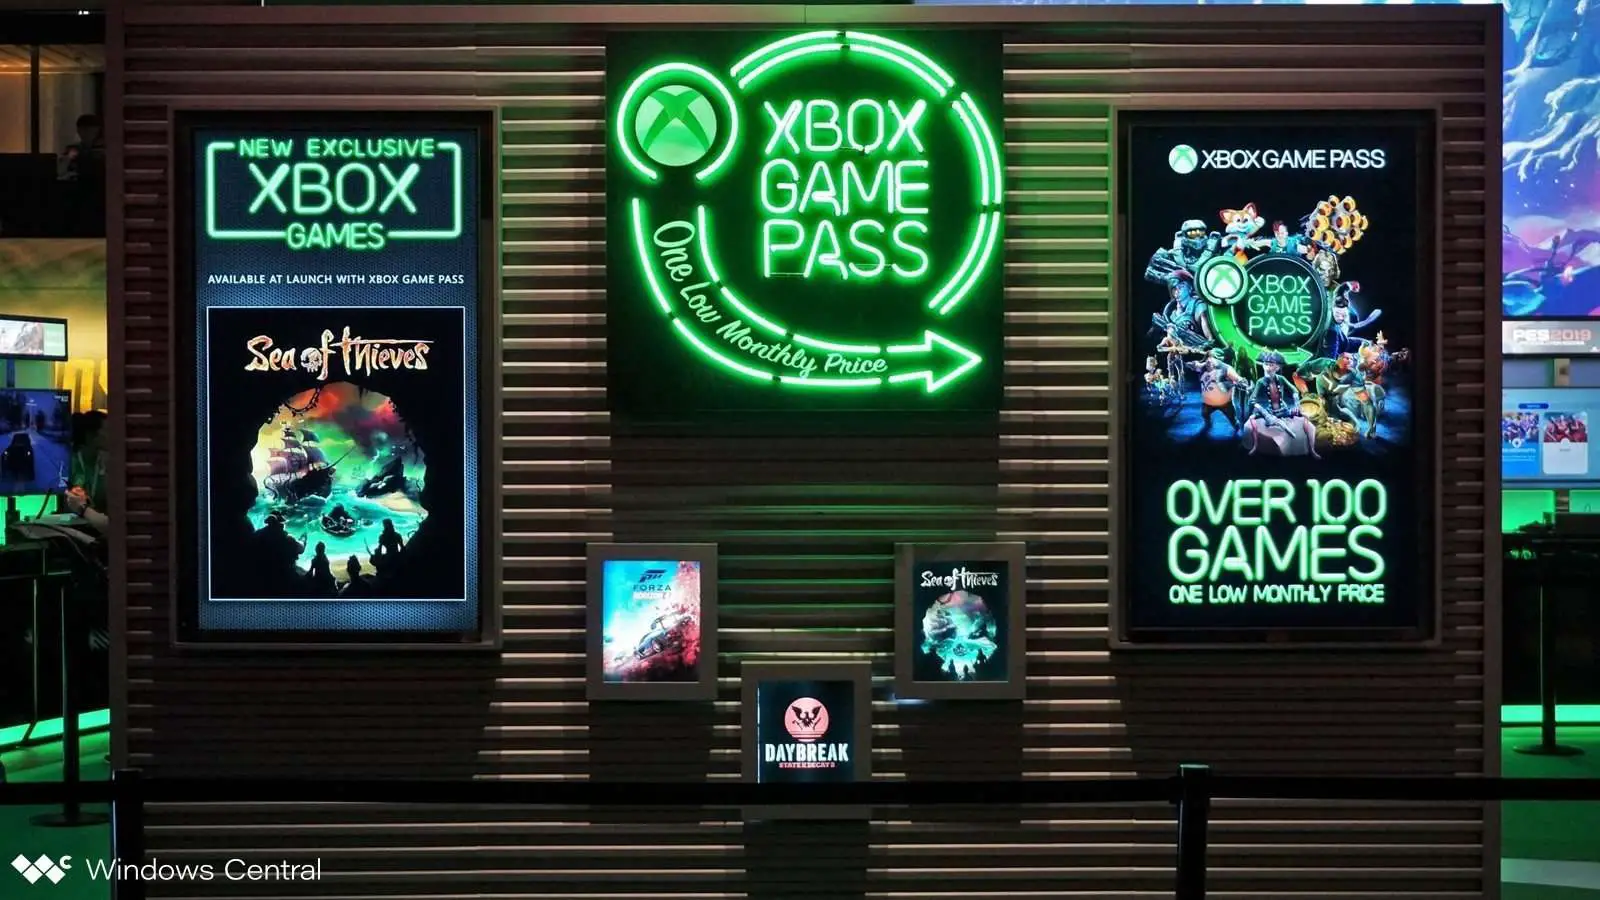 What is Xbox Game Pass Ultimate?